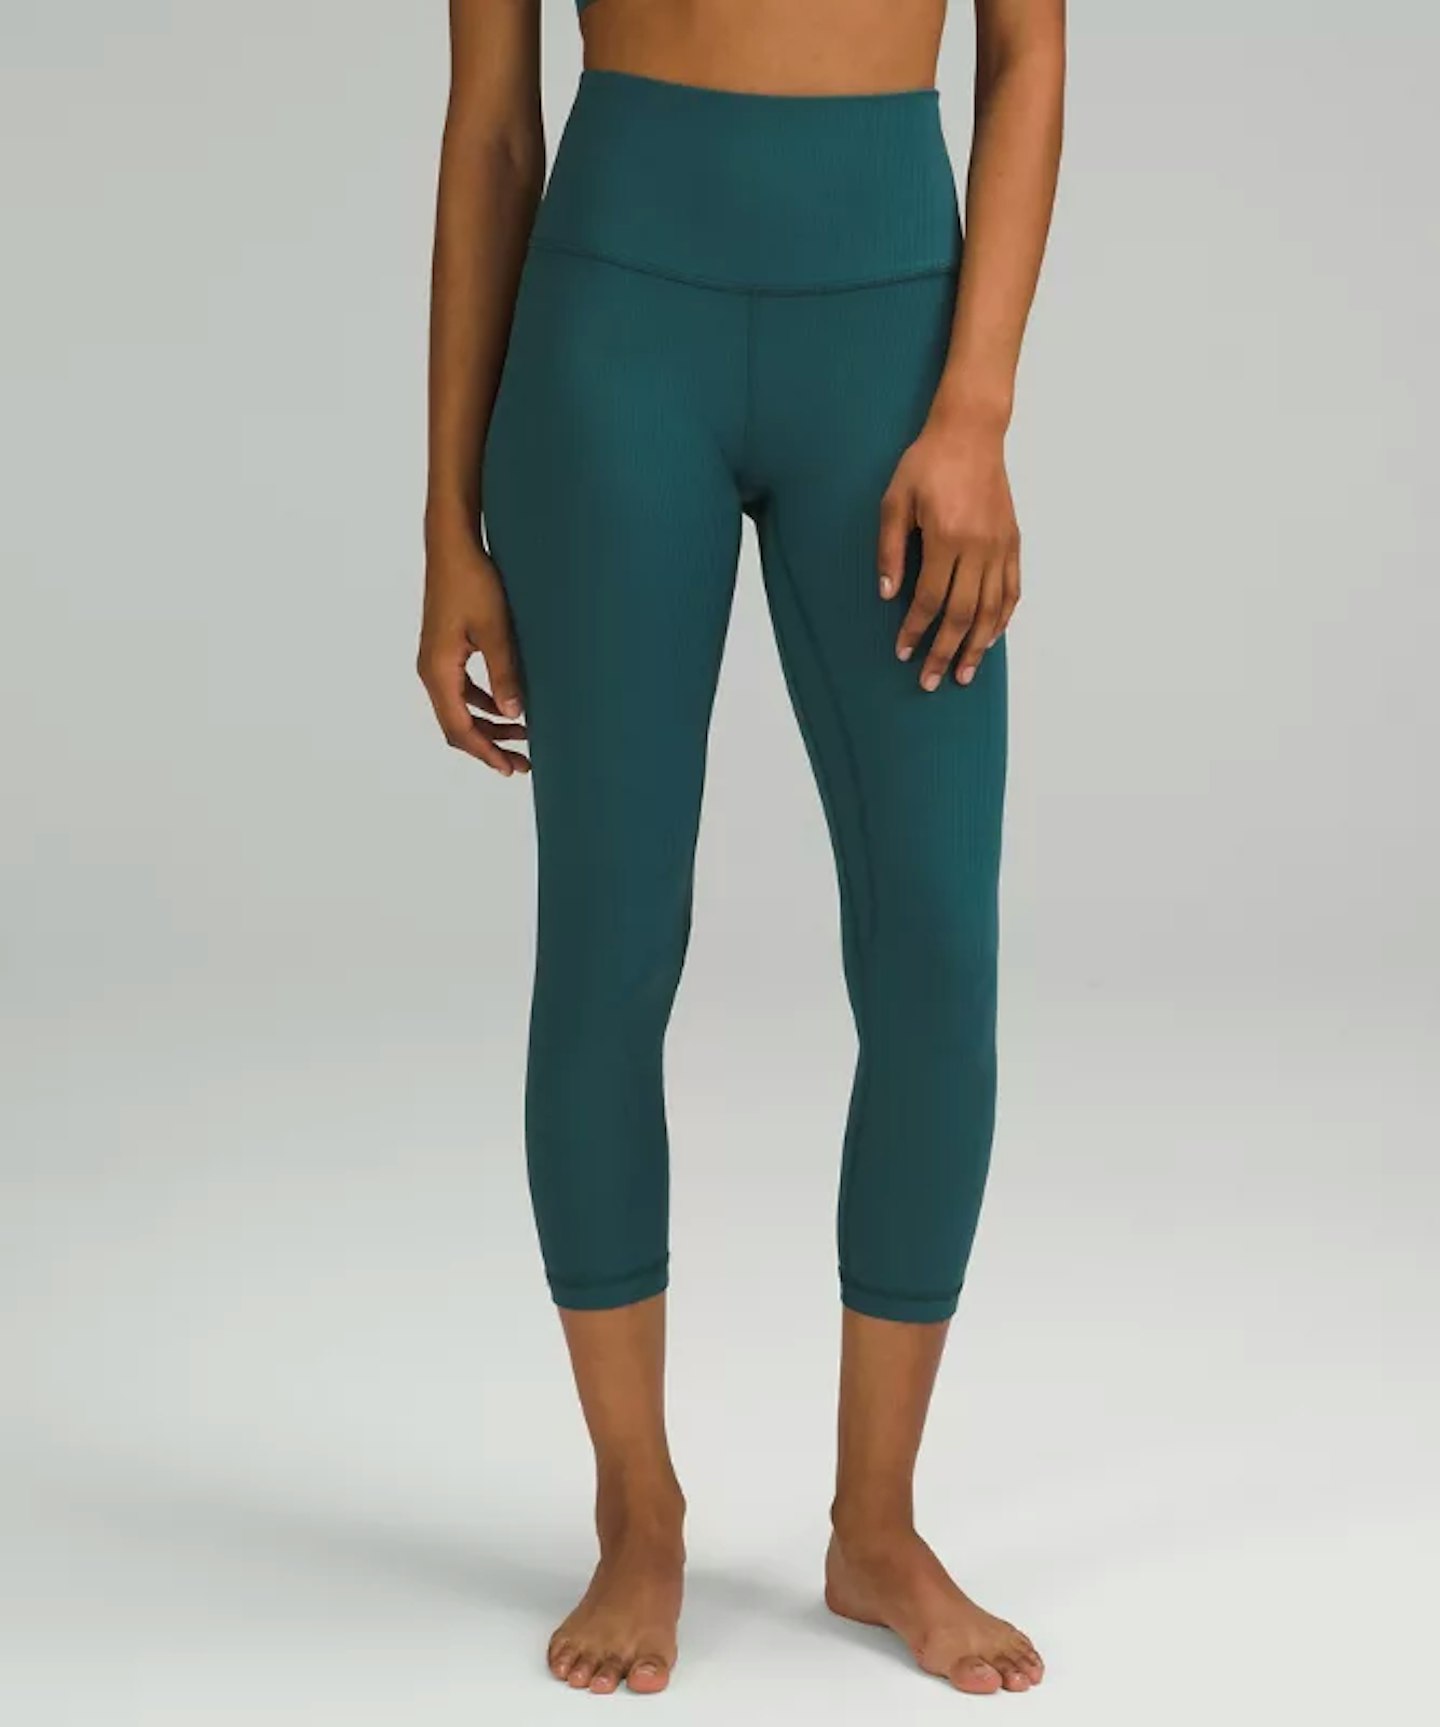 Lululemon Align Leggings: Are They Worth Buying? Here's Our Honest ...